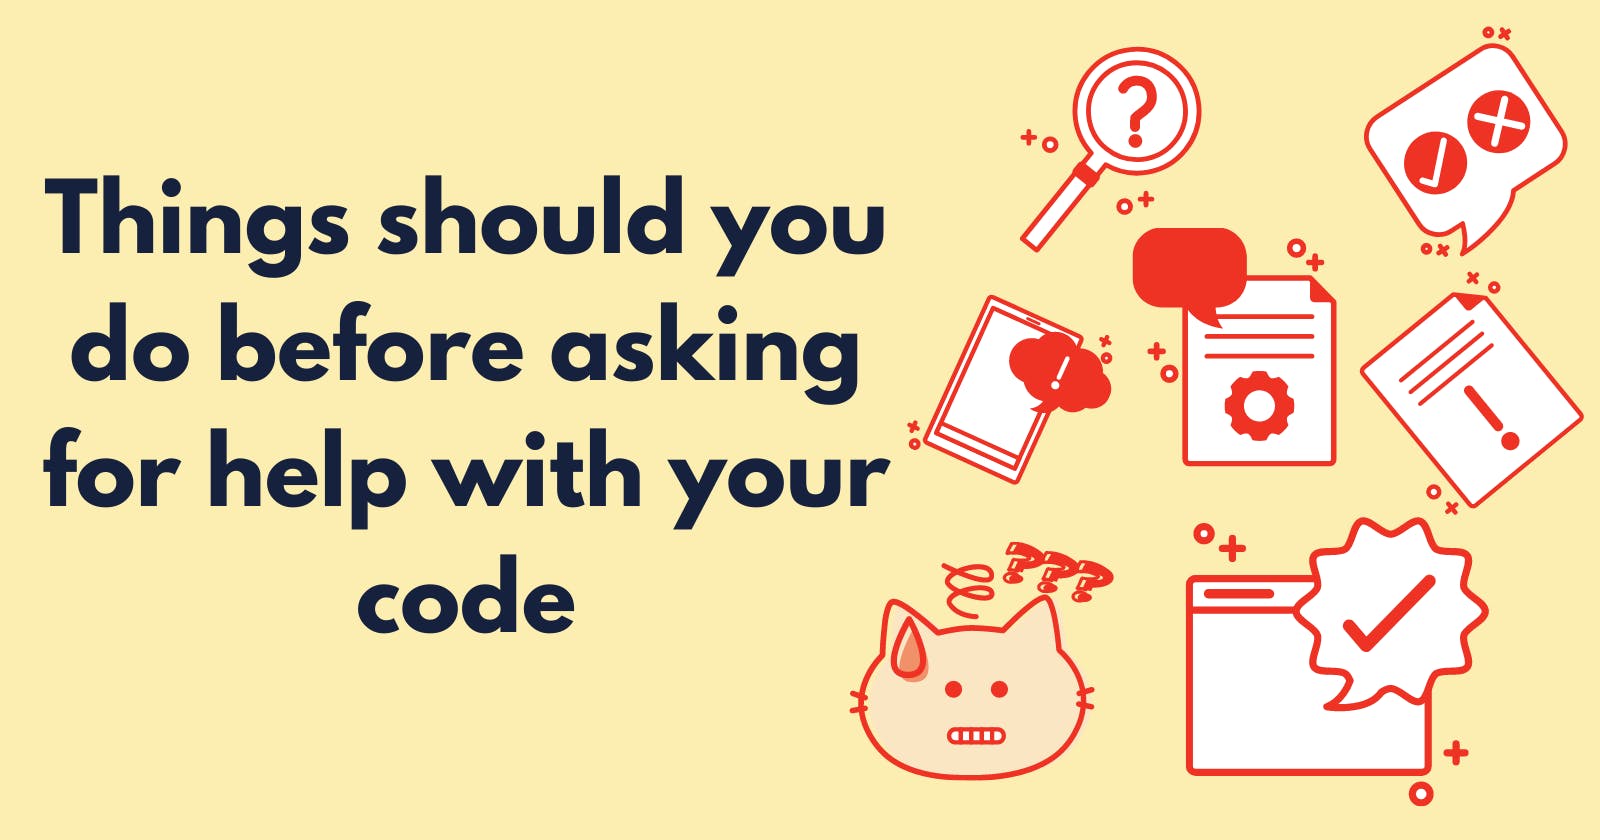 Things should you do before asking for help with your code 😄